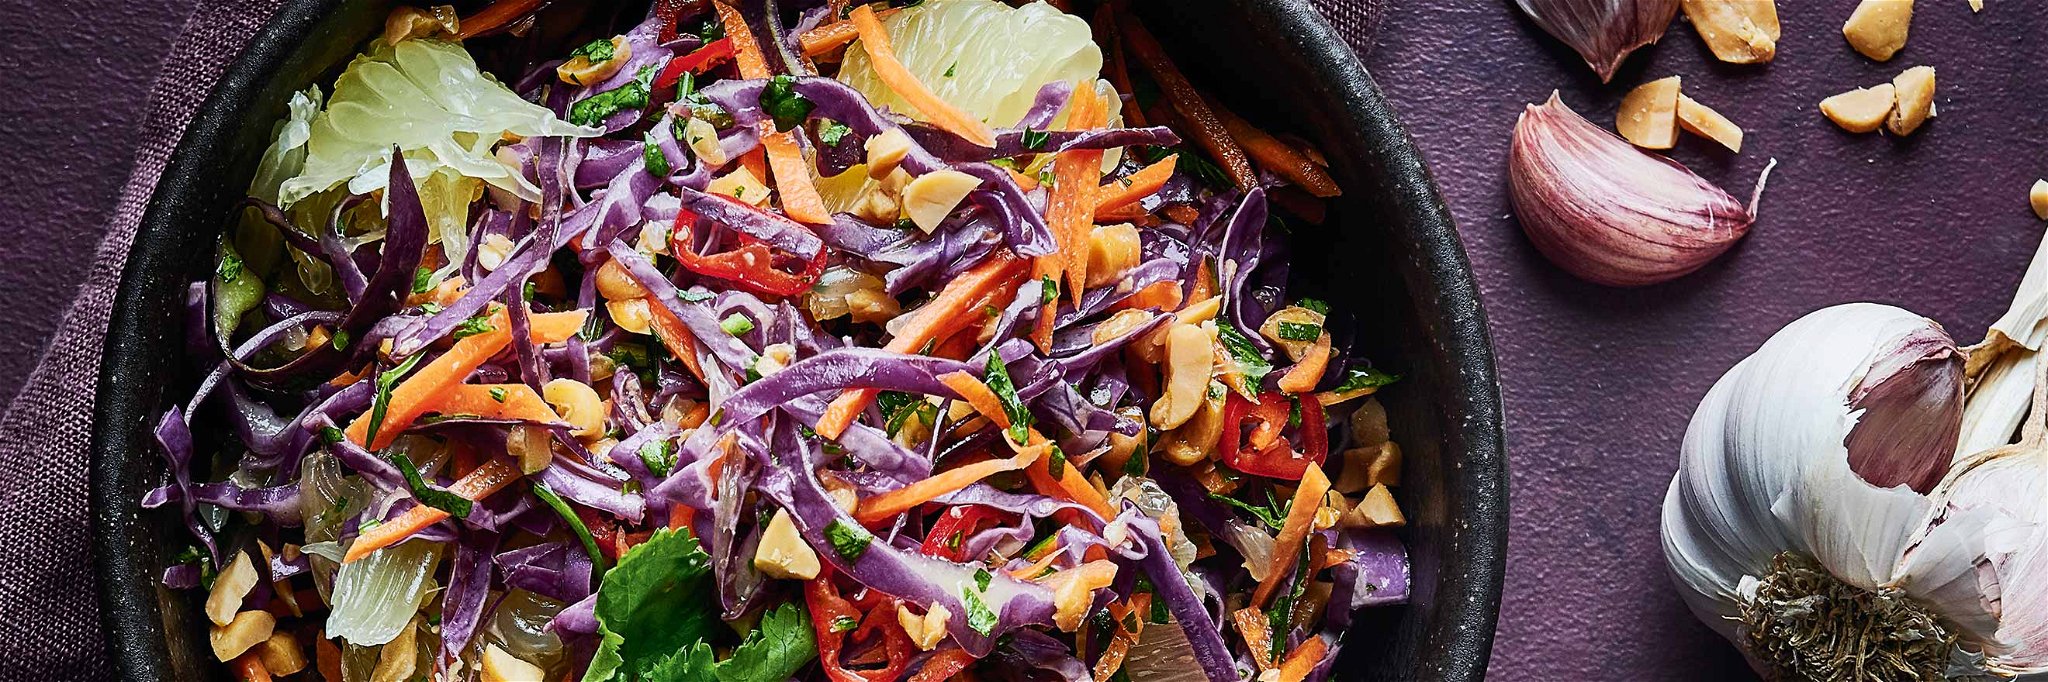 Coleslaw of Red Cabbage and Citrus Fruit